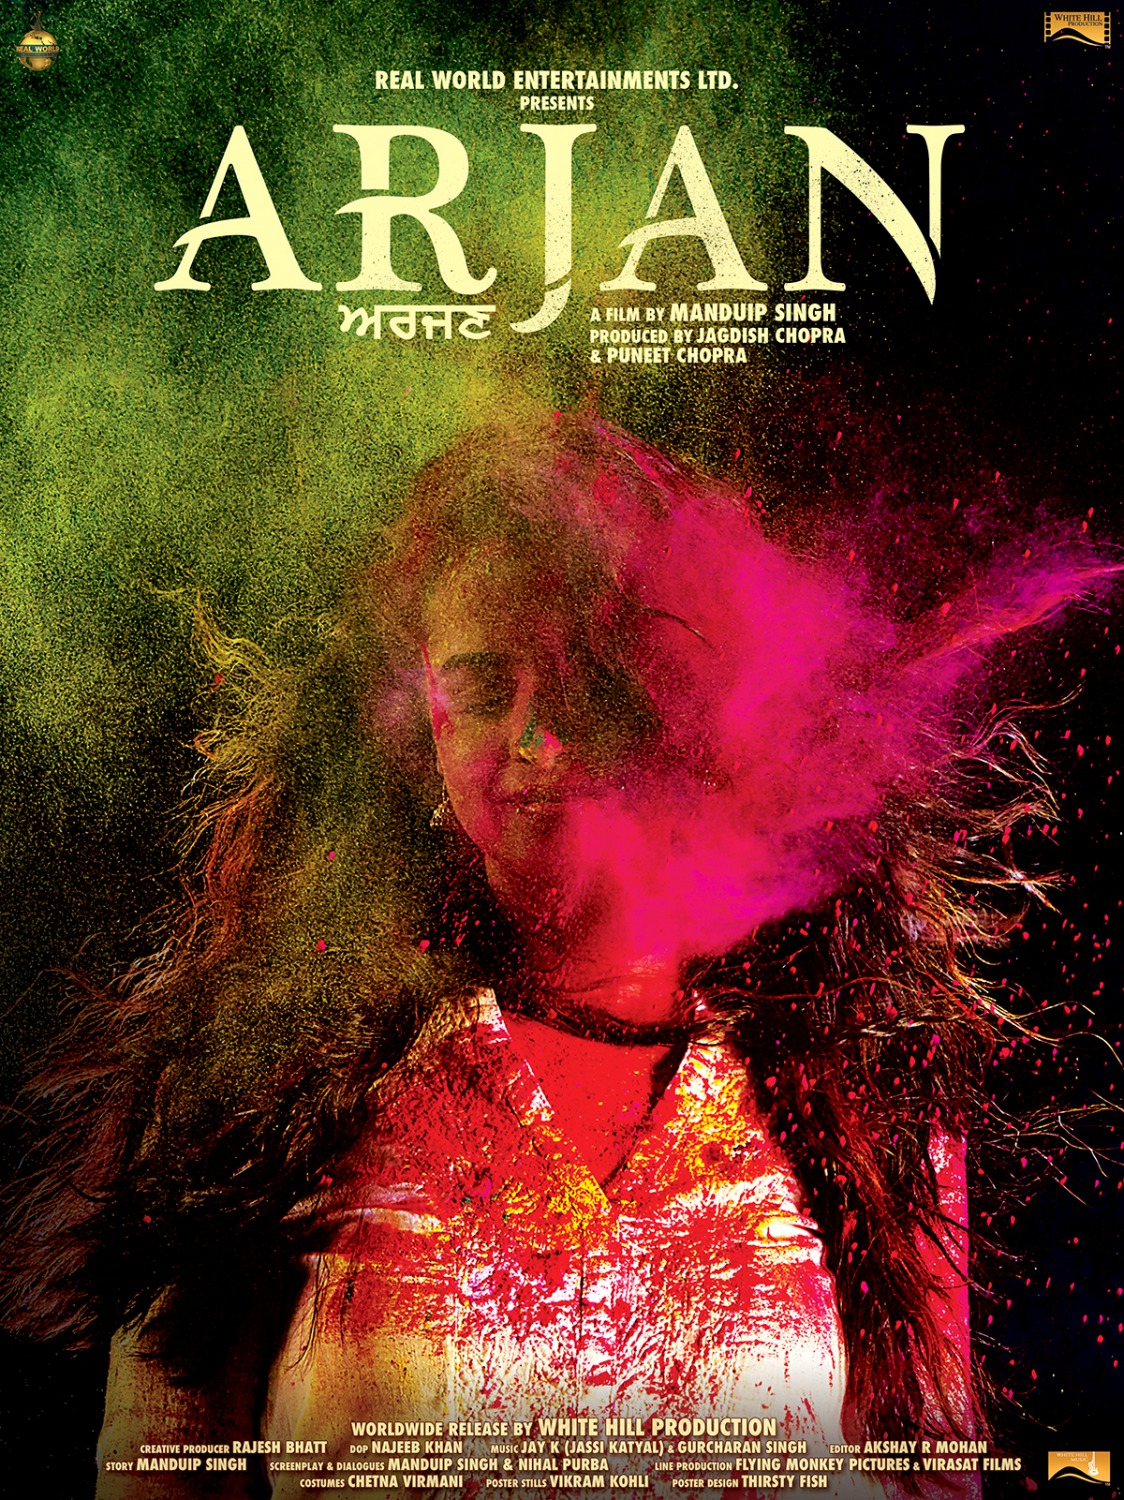 Extra Large Movie Poster Image for Arjan (#2 of 5)